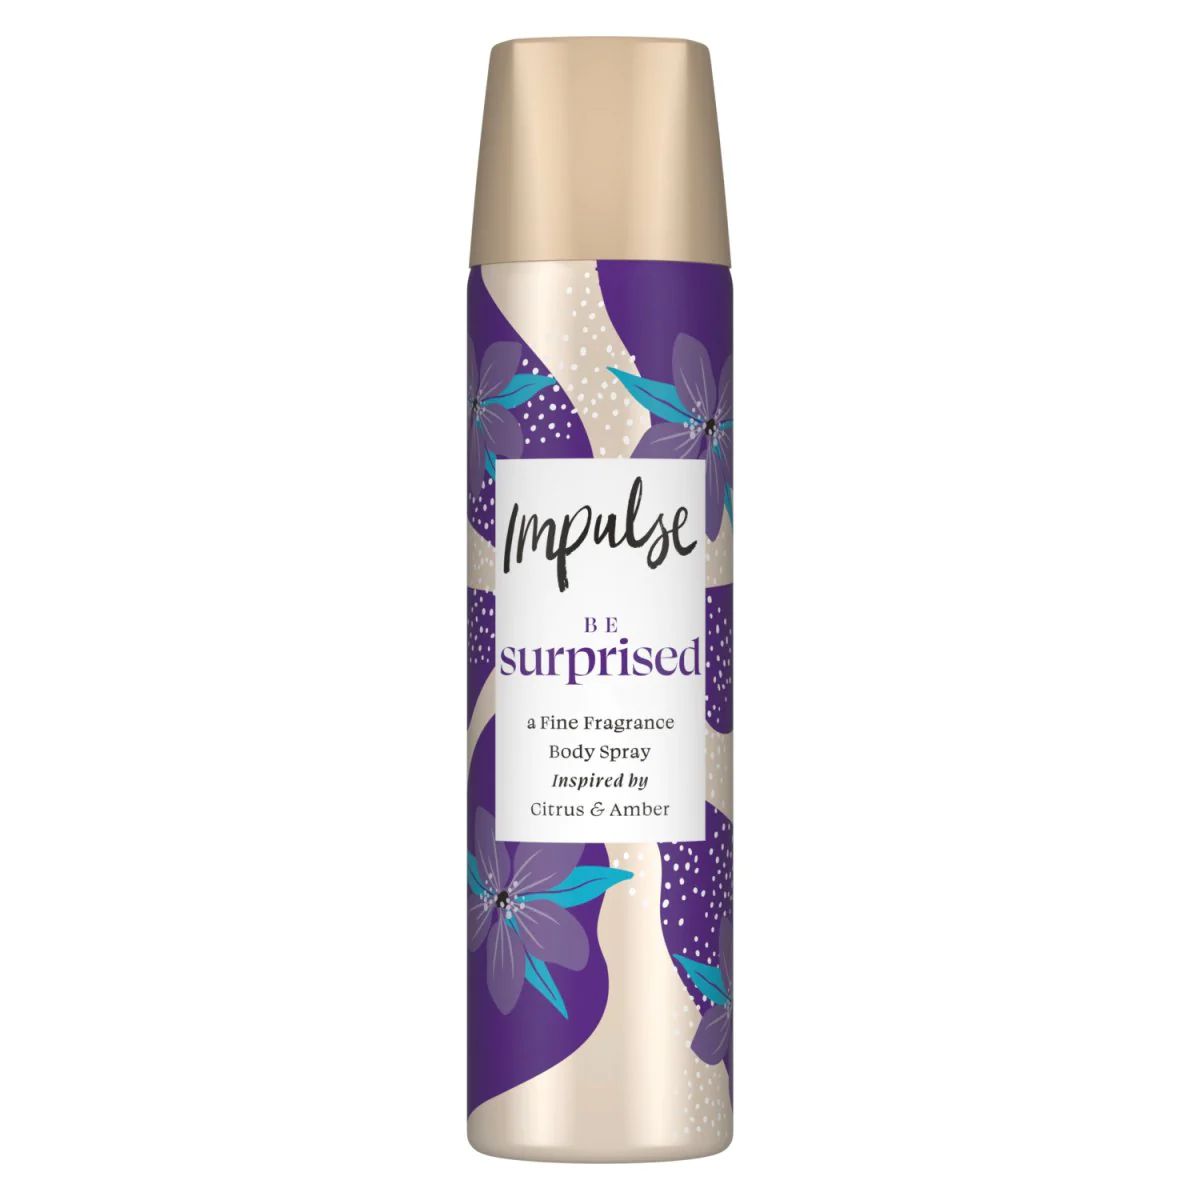 A Impulse - Be Surprise Body Fragrance Spray - 75ml bottle of hair spray with a purple flower on it.